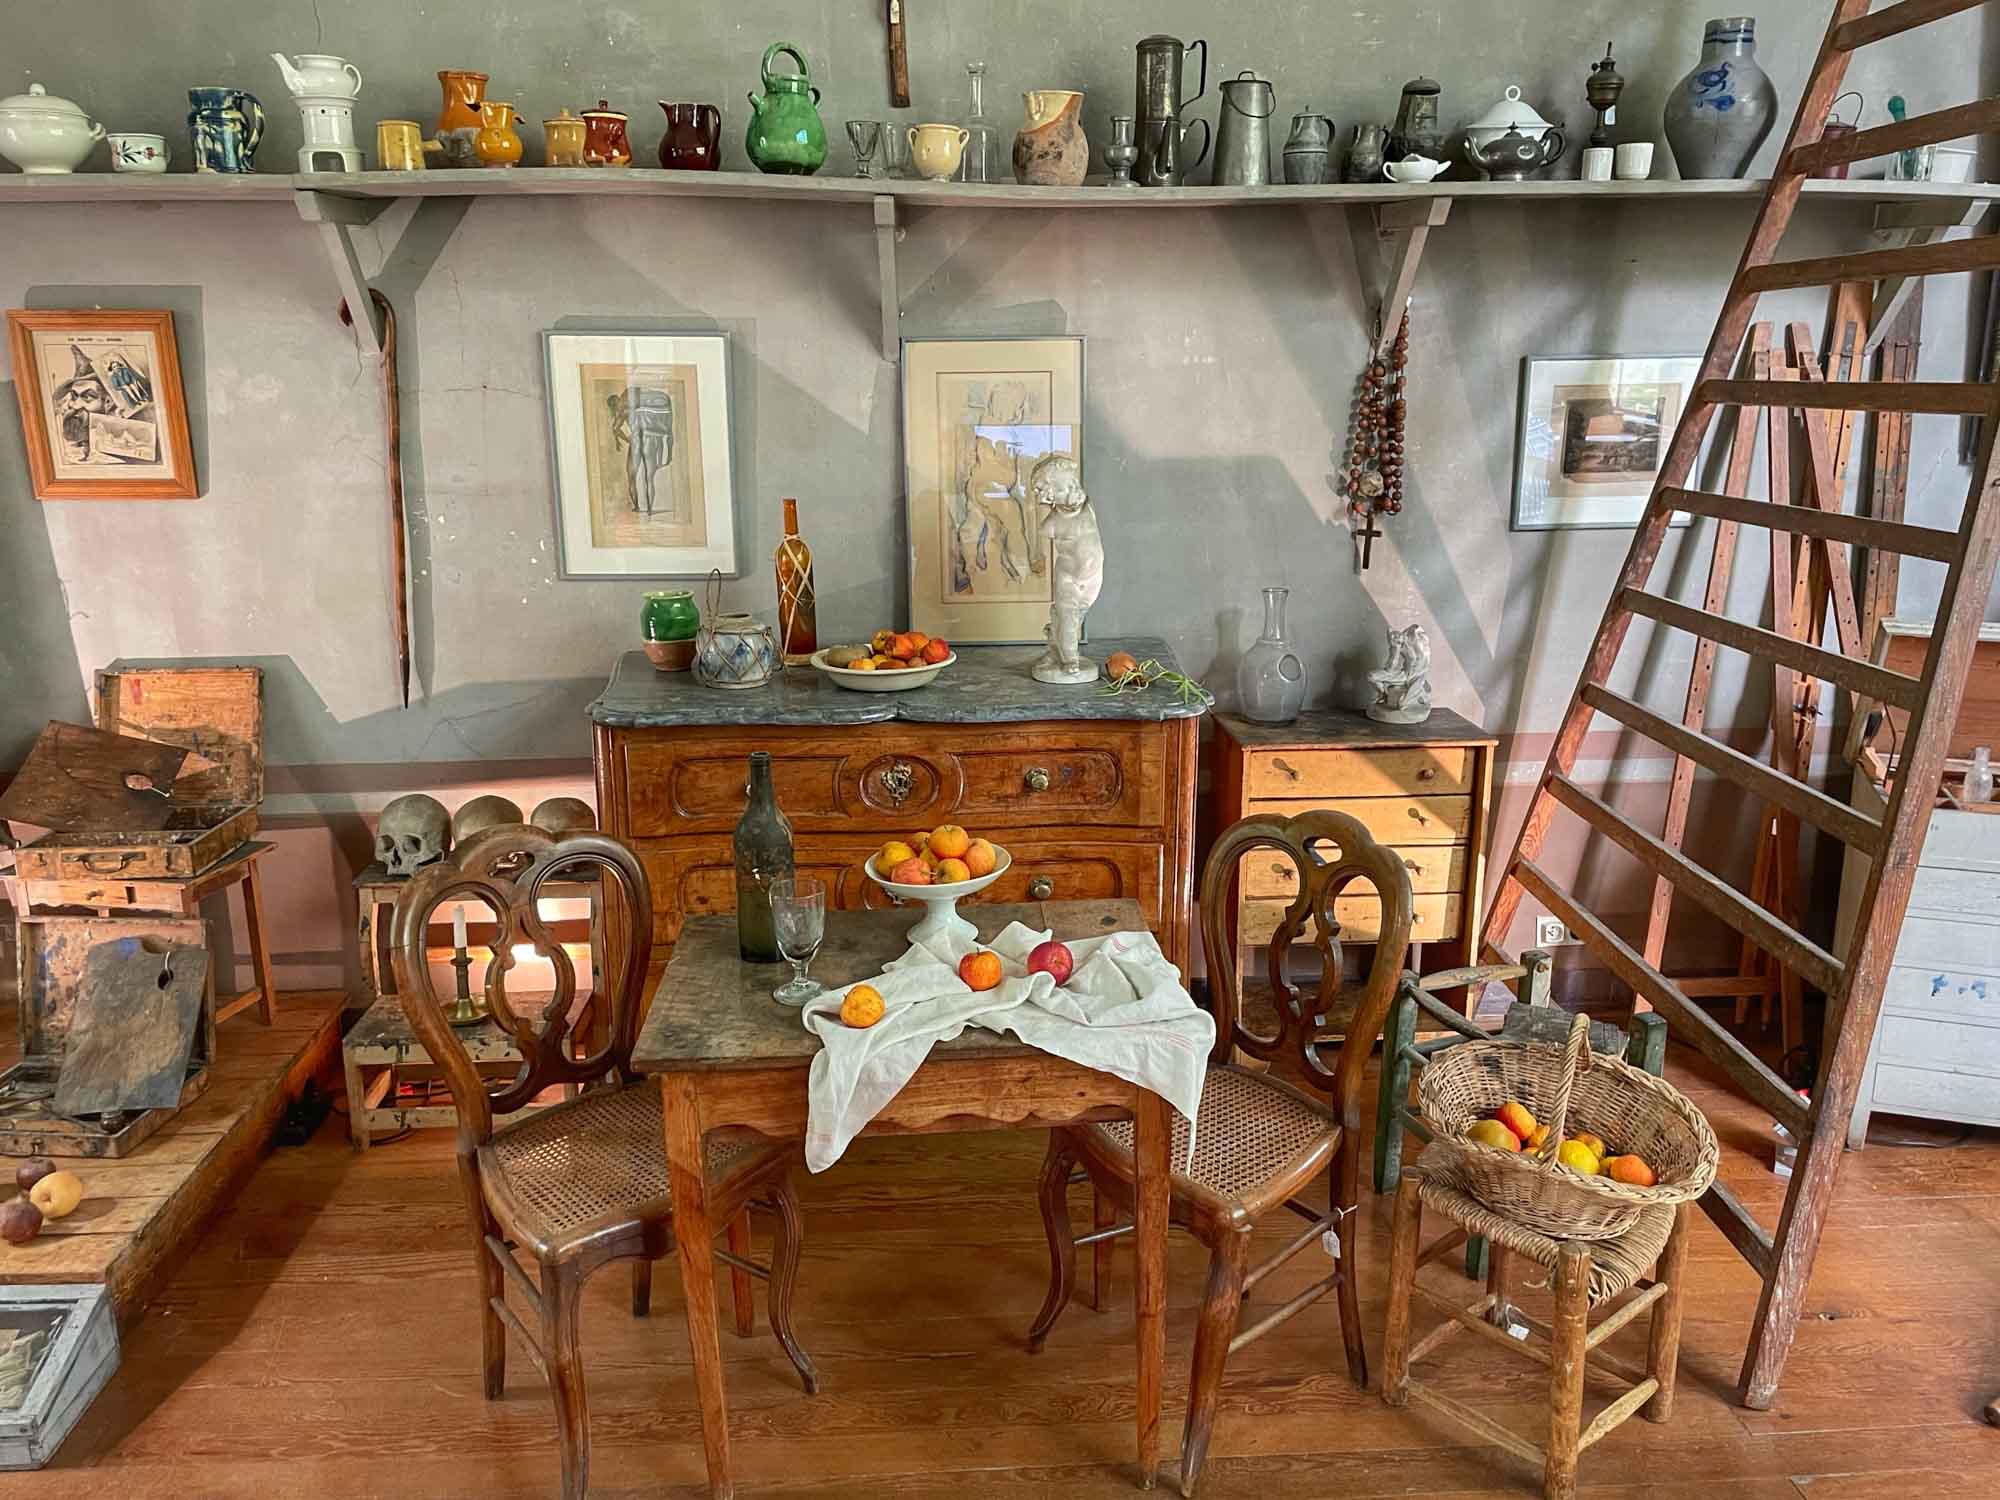 Wooden table and chairs, dresser, and ladder along with fruit props and other items in an artist's studio.